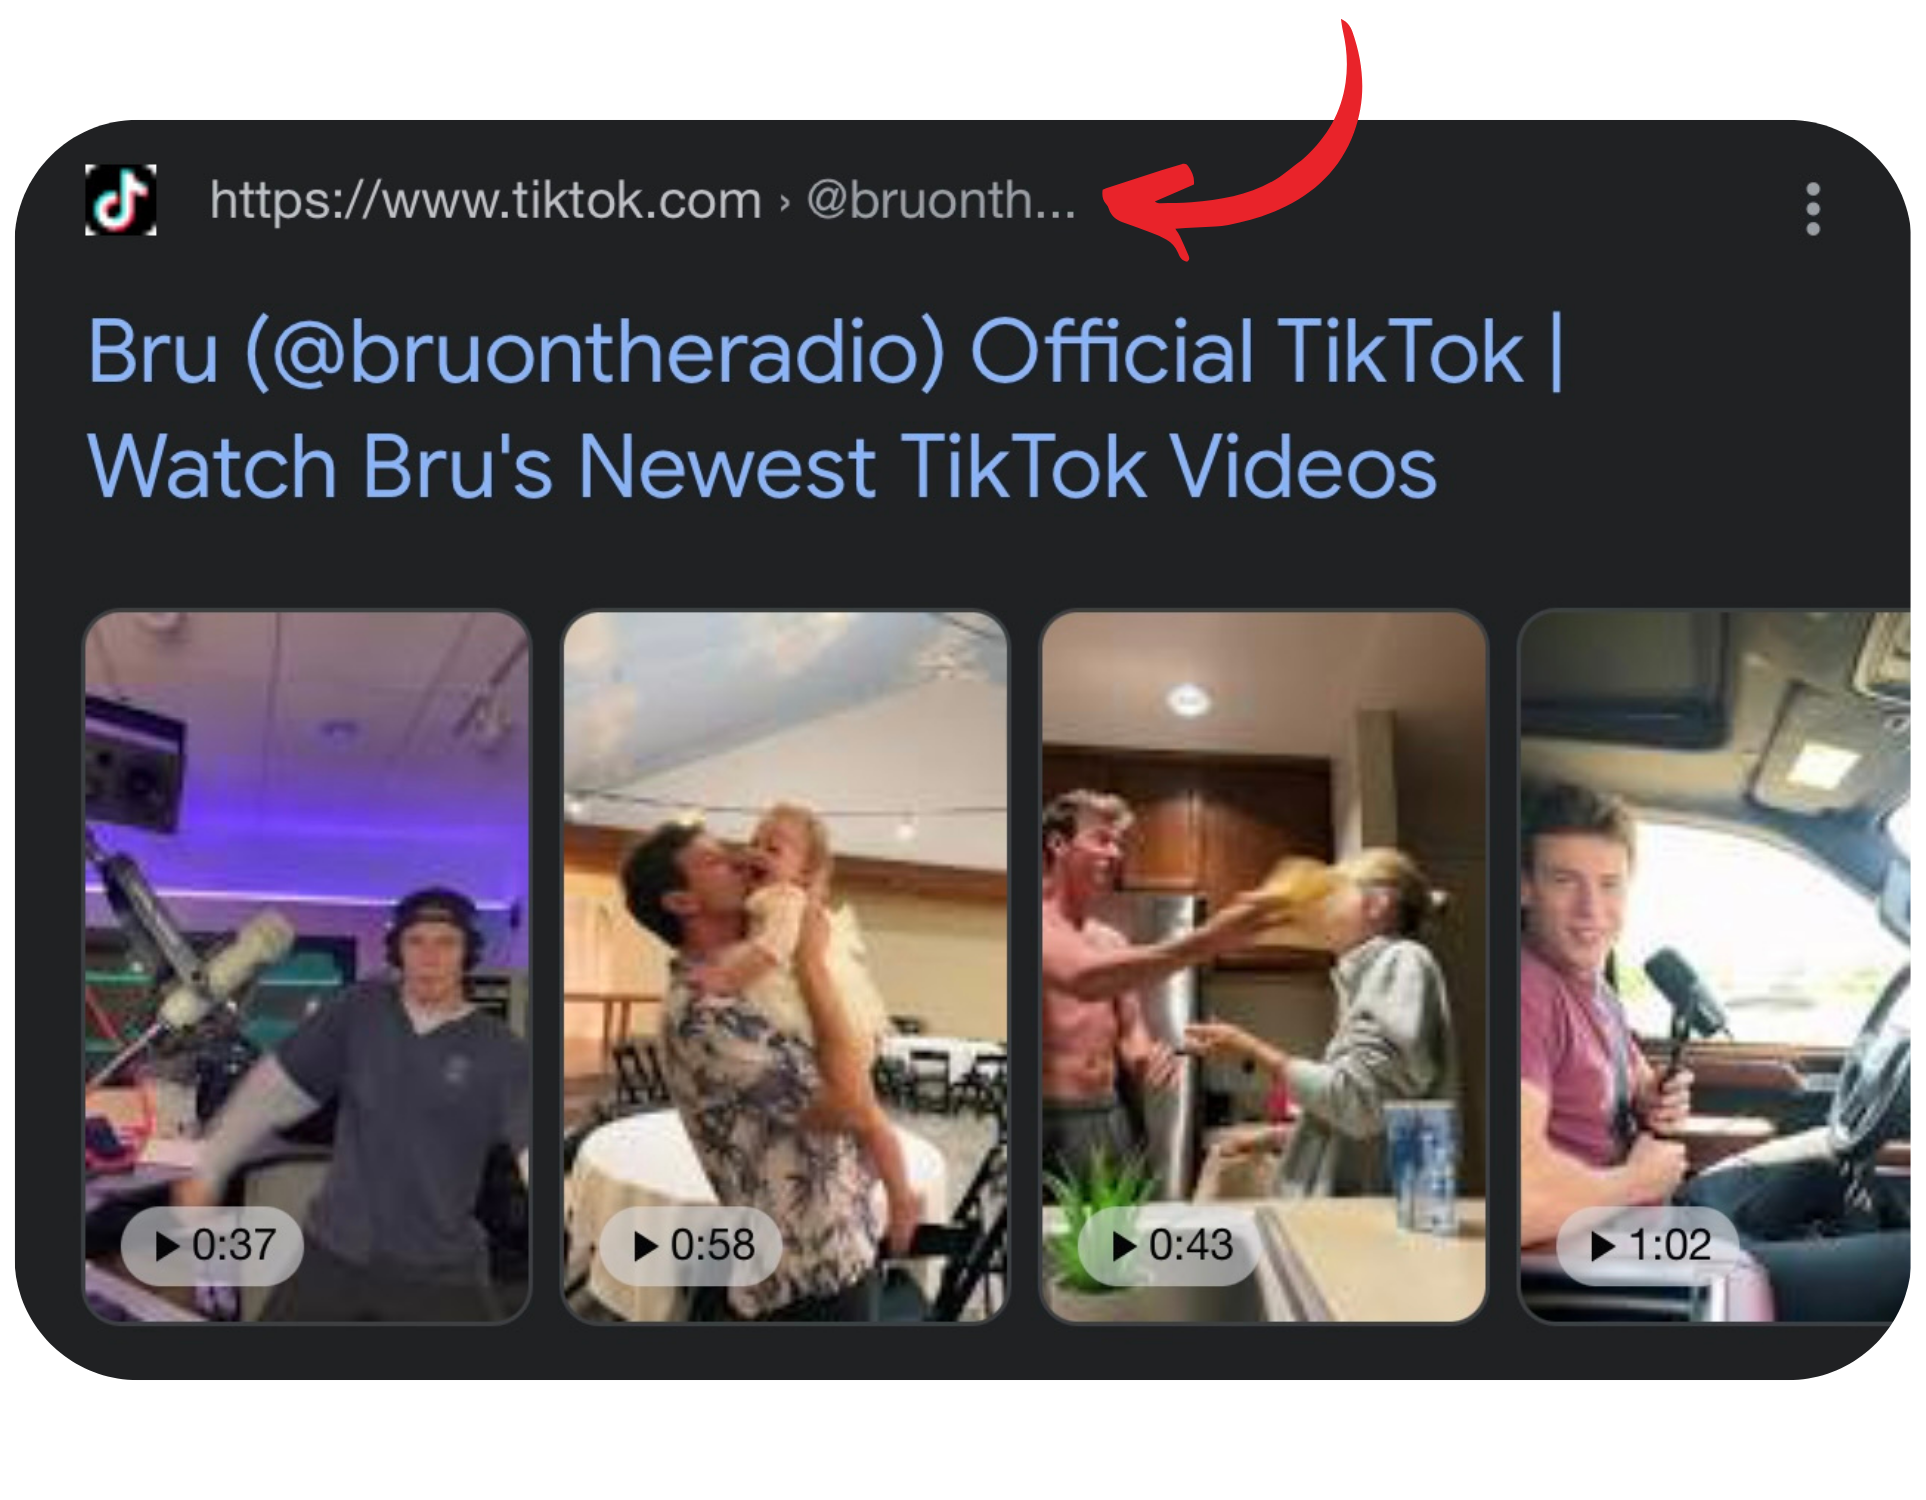 google showing popular users' tiktok profiles on serp with video carousel